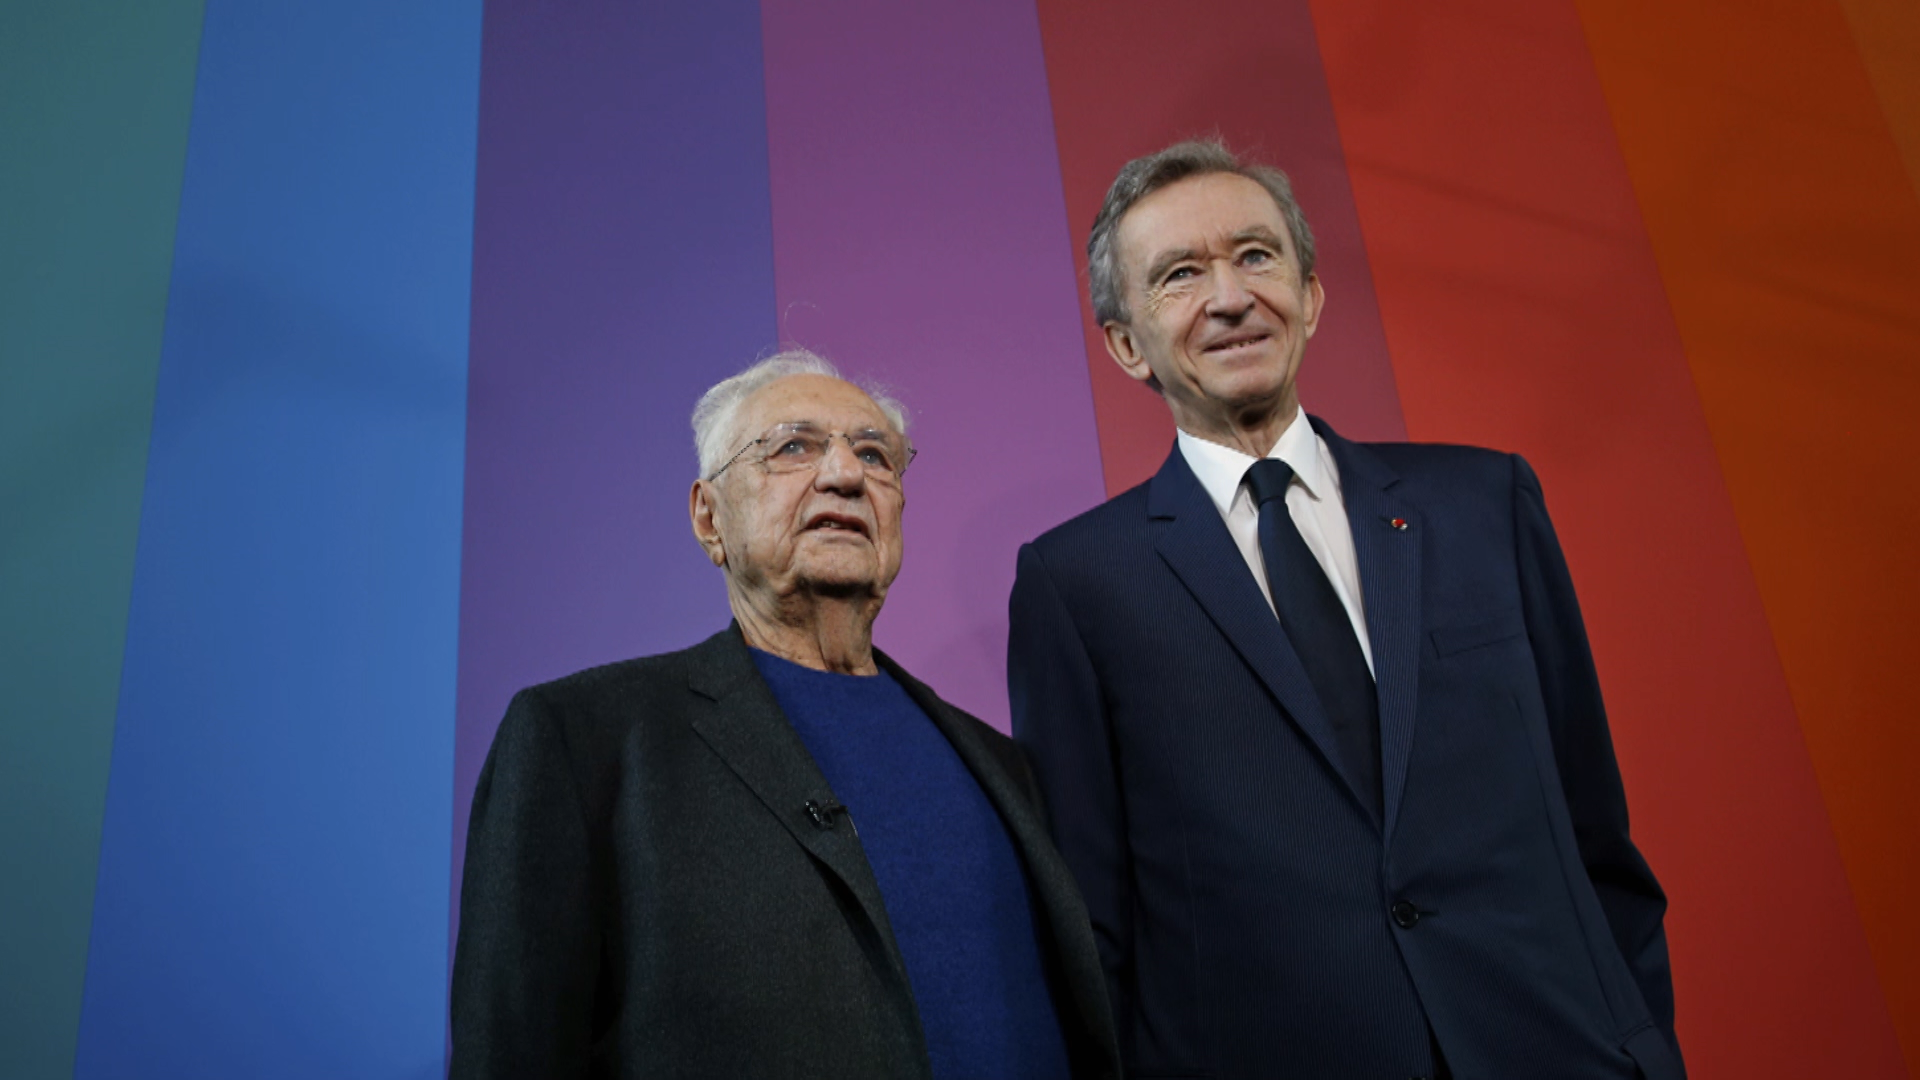 LVMH CEO Bernard Arnault Meets with Department Store Executives over  Partnerships